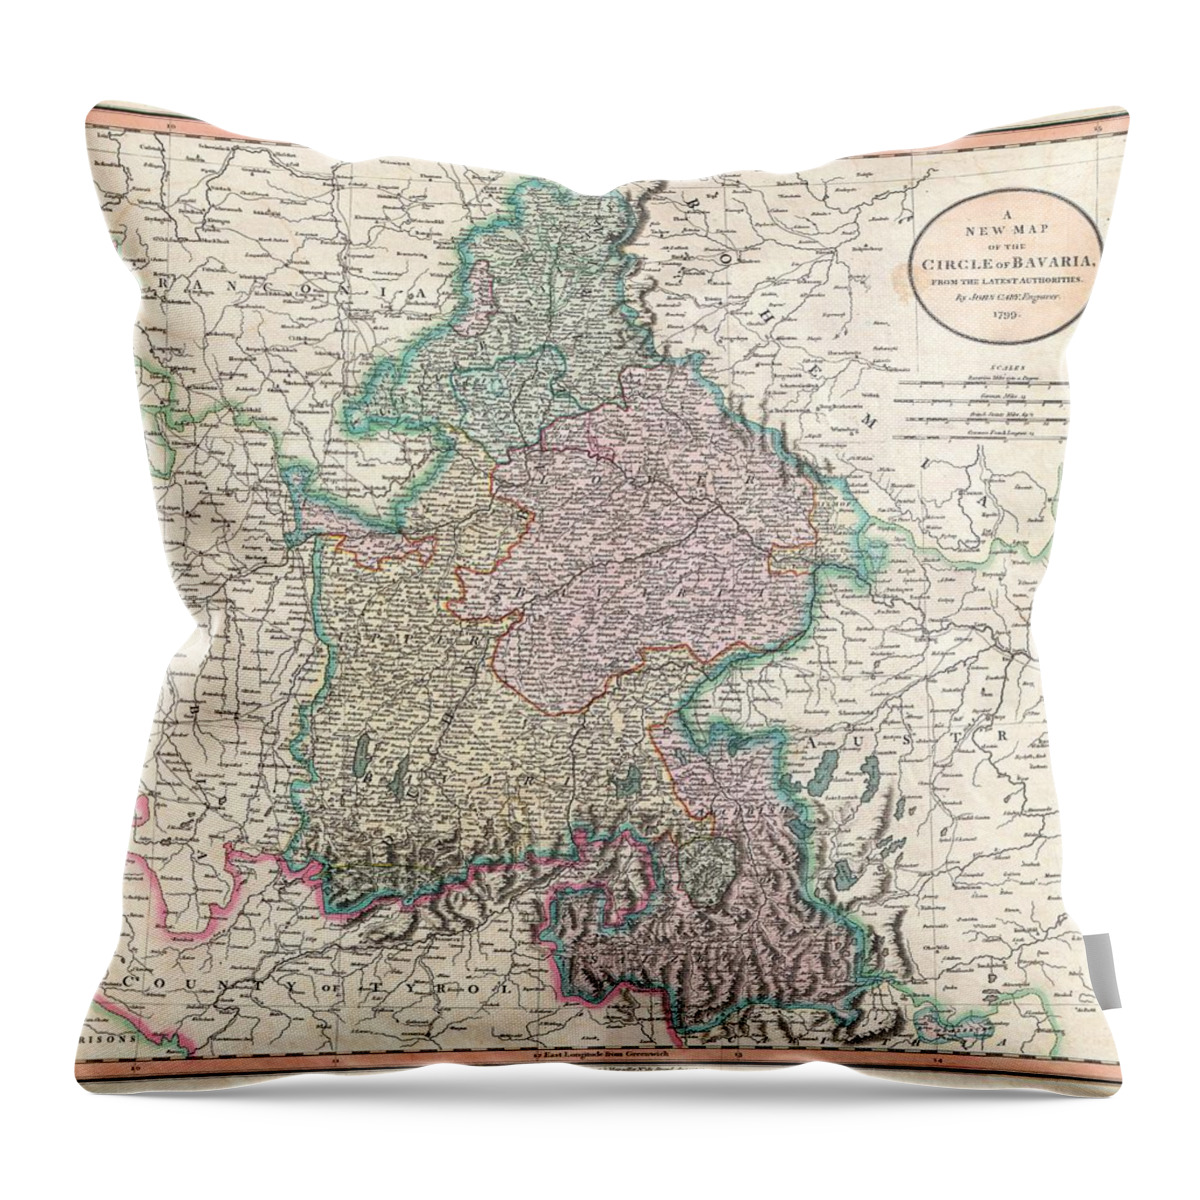 Antique Map Of Bavaria Throw Pillow featuring the drawing Antique Maps - Old Cartographic maps - Antique Map of Bavaria, Salzburg, Germany - 1799 by Studio Grafiikka